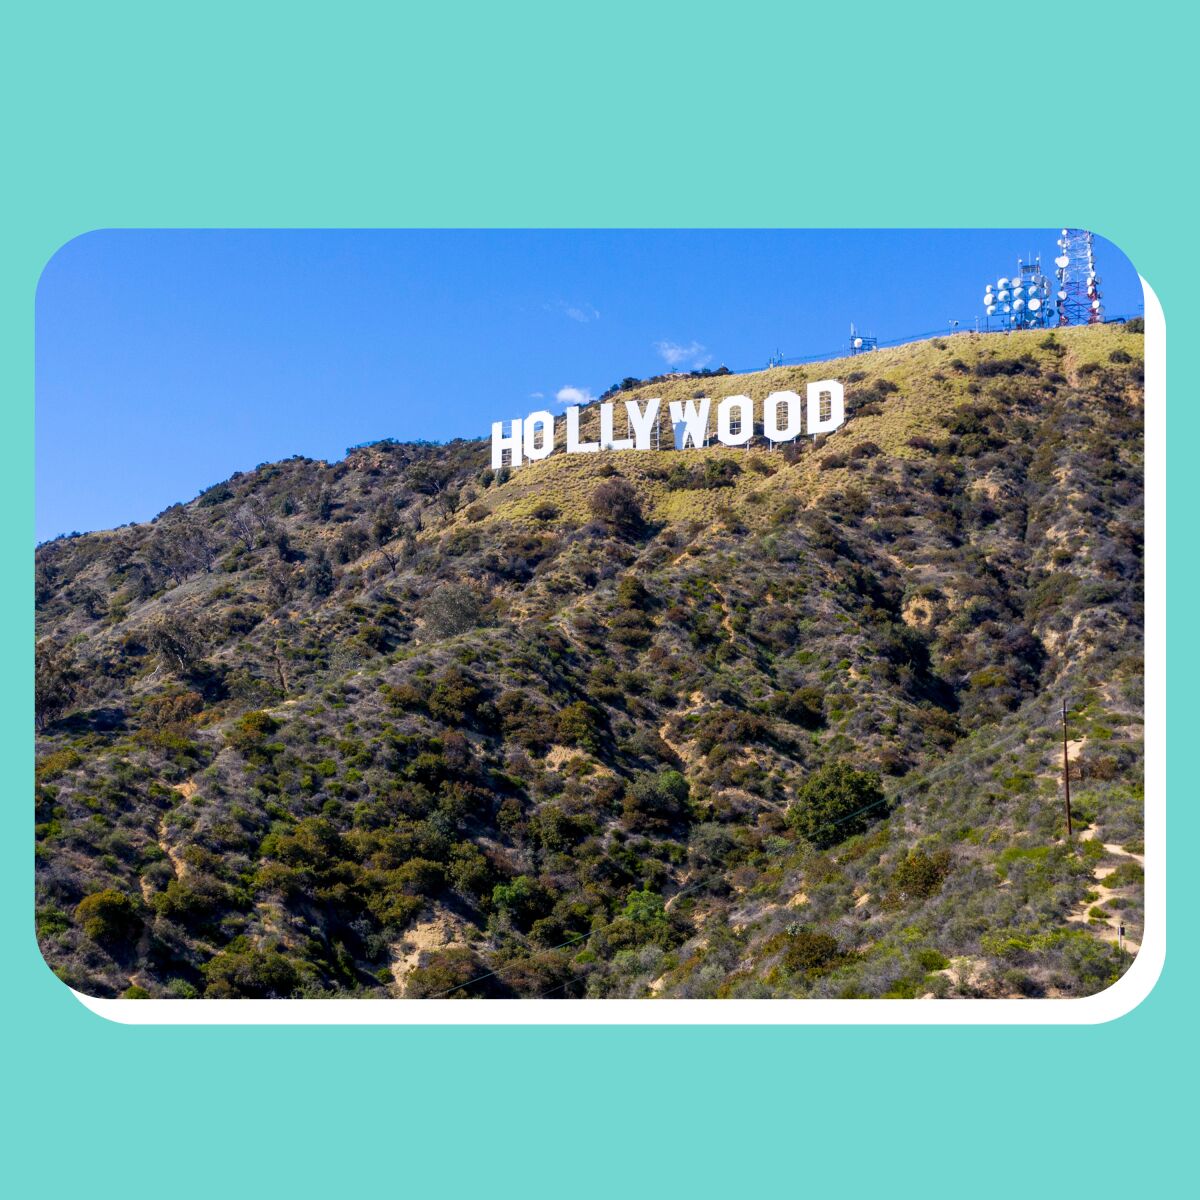 Large white letters on a green hillside spell out "Hollywood," with blue sky in the background.